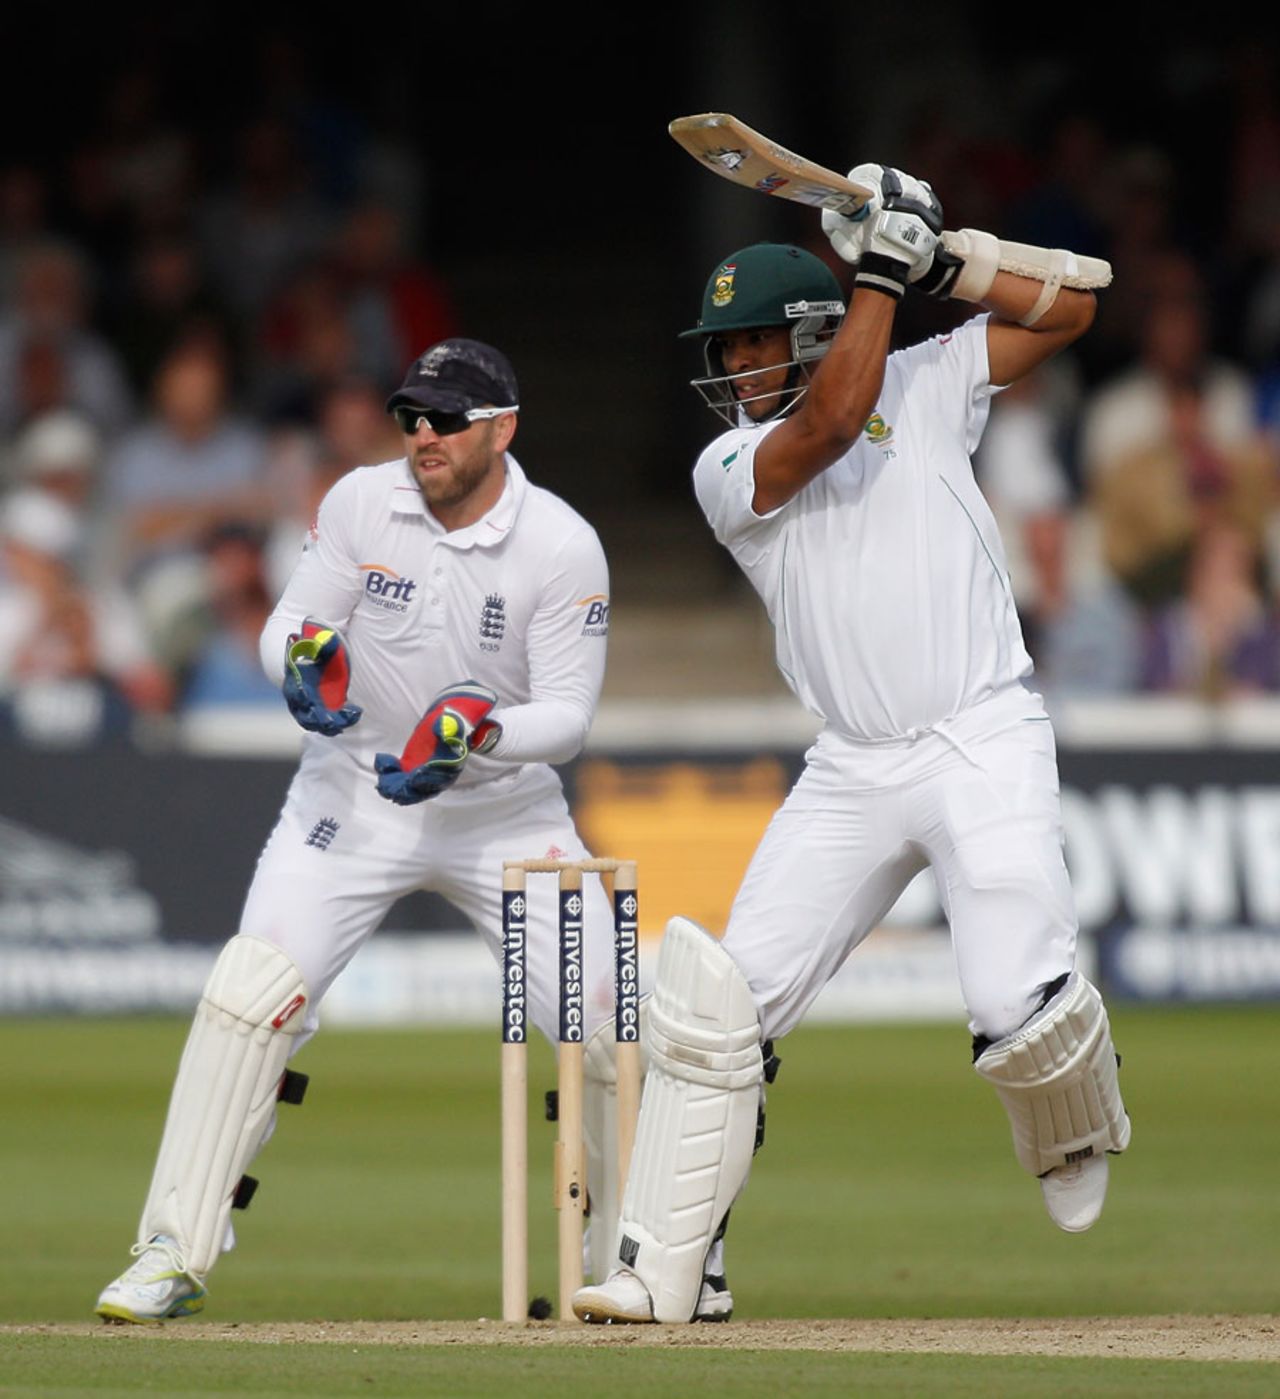 Vernon Philander drives during his career-best score, England v South Africa, 3rd Investec Test, Lord's, 1st day, August 16, 2012